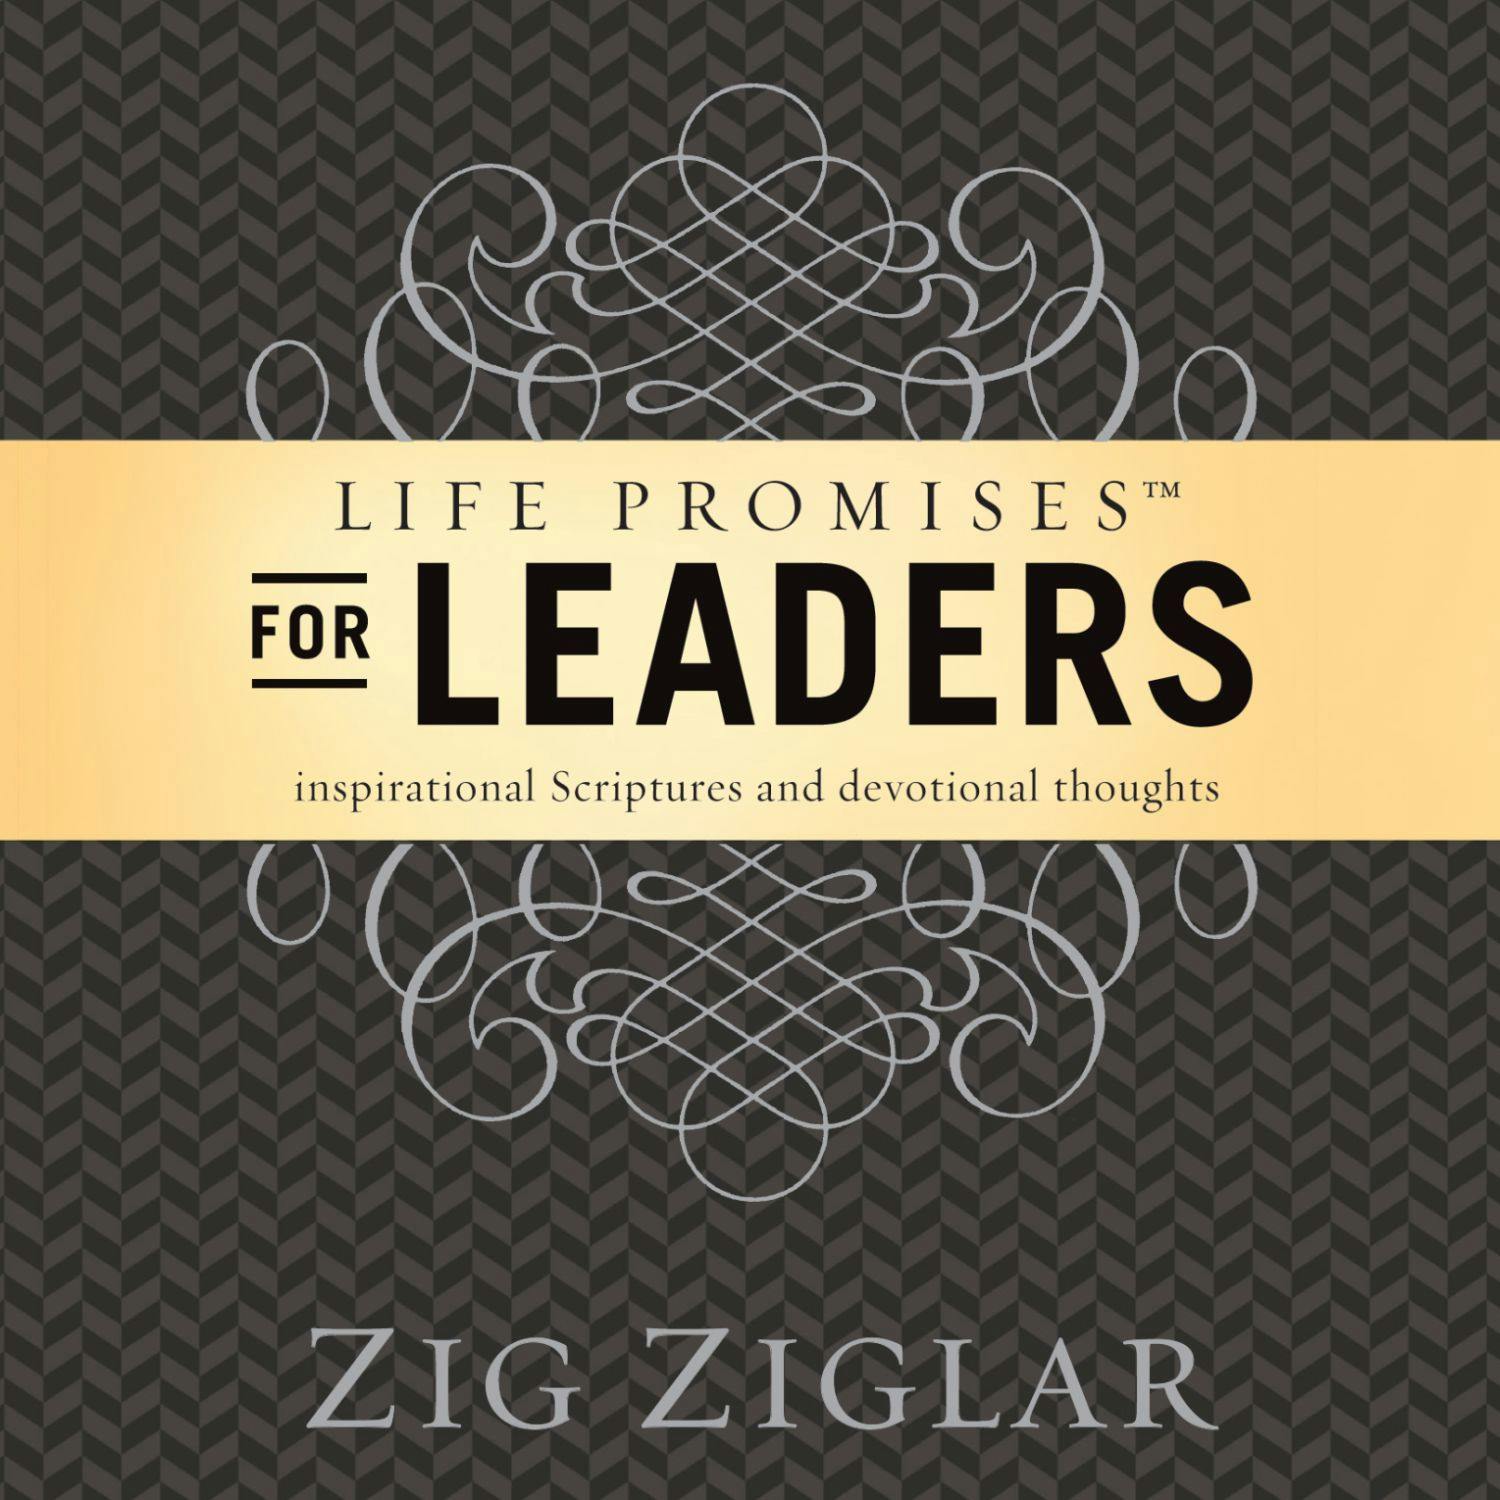 Life Promises for Leaders: Inspirational Scriptures and Devotional Thoughts - undefined